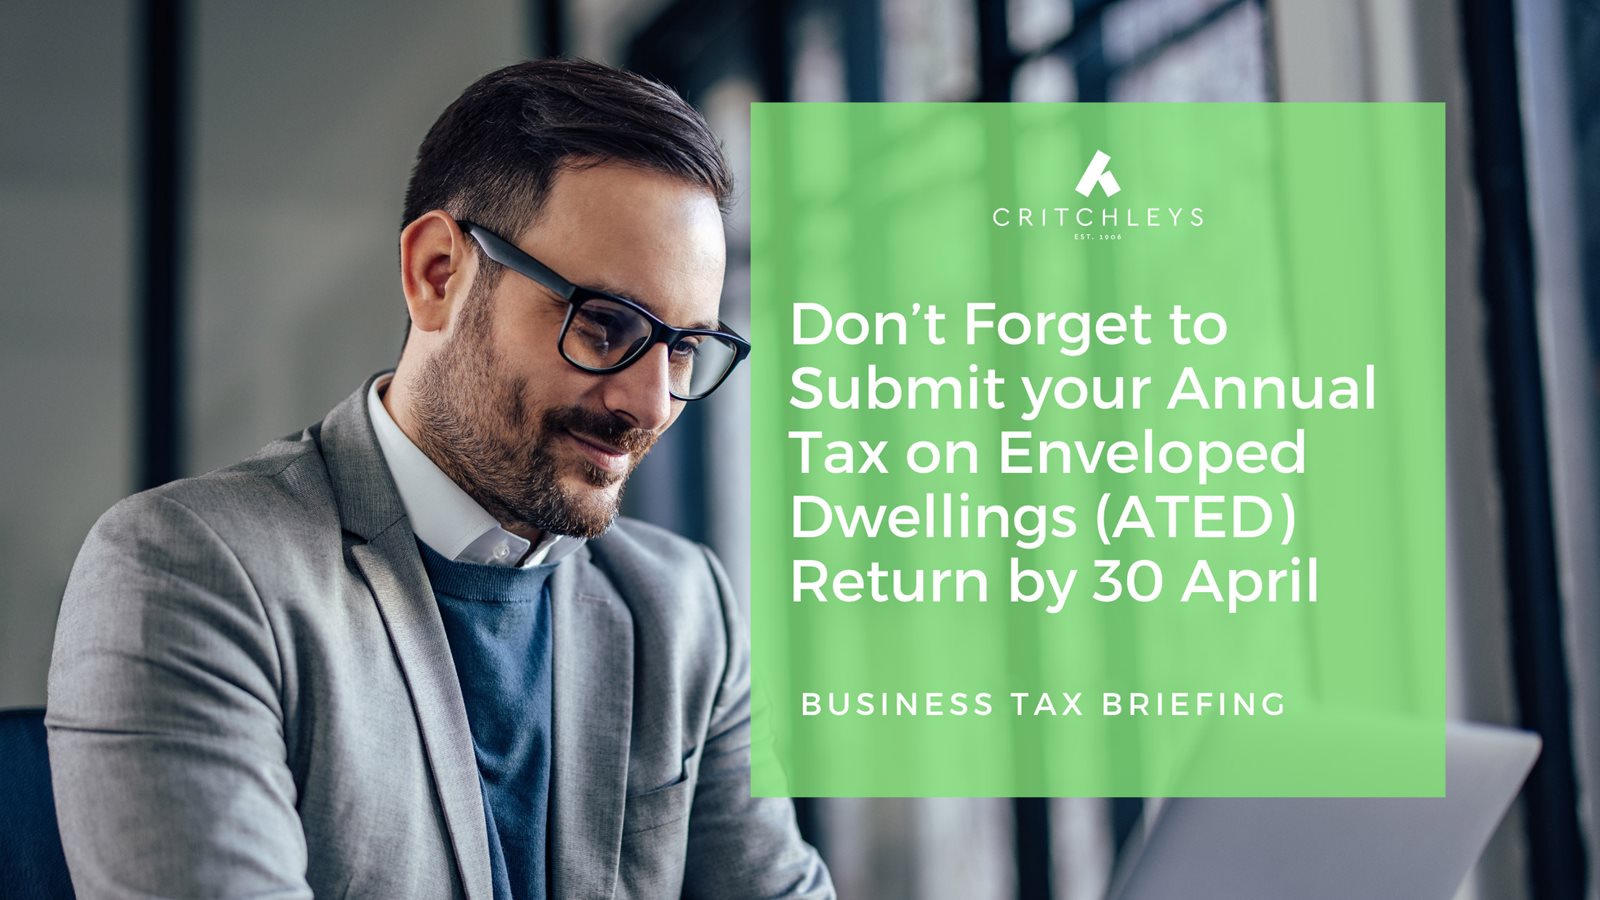 Don’t Forget to Submit your Annual Tax on Enveloped Dwellings (ATED) Return by 30 April 